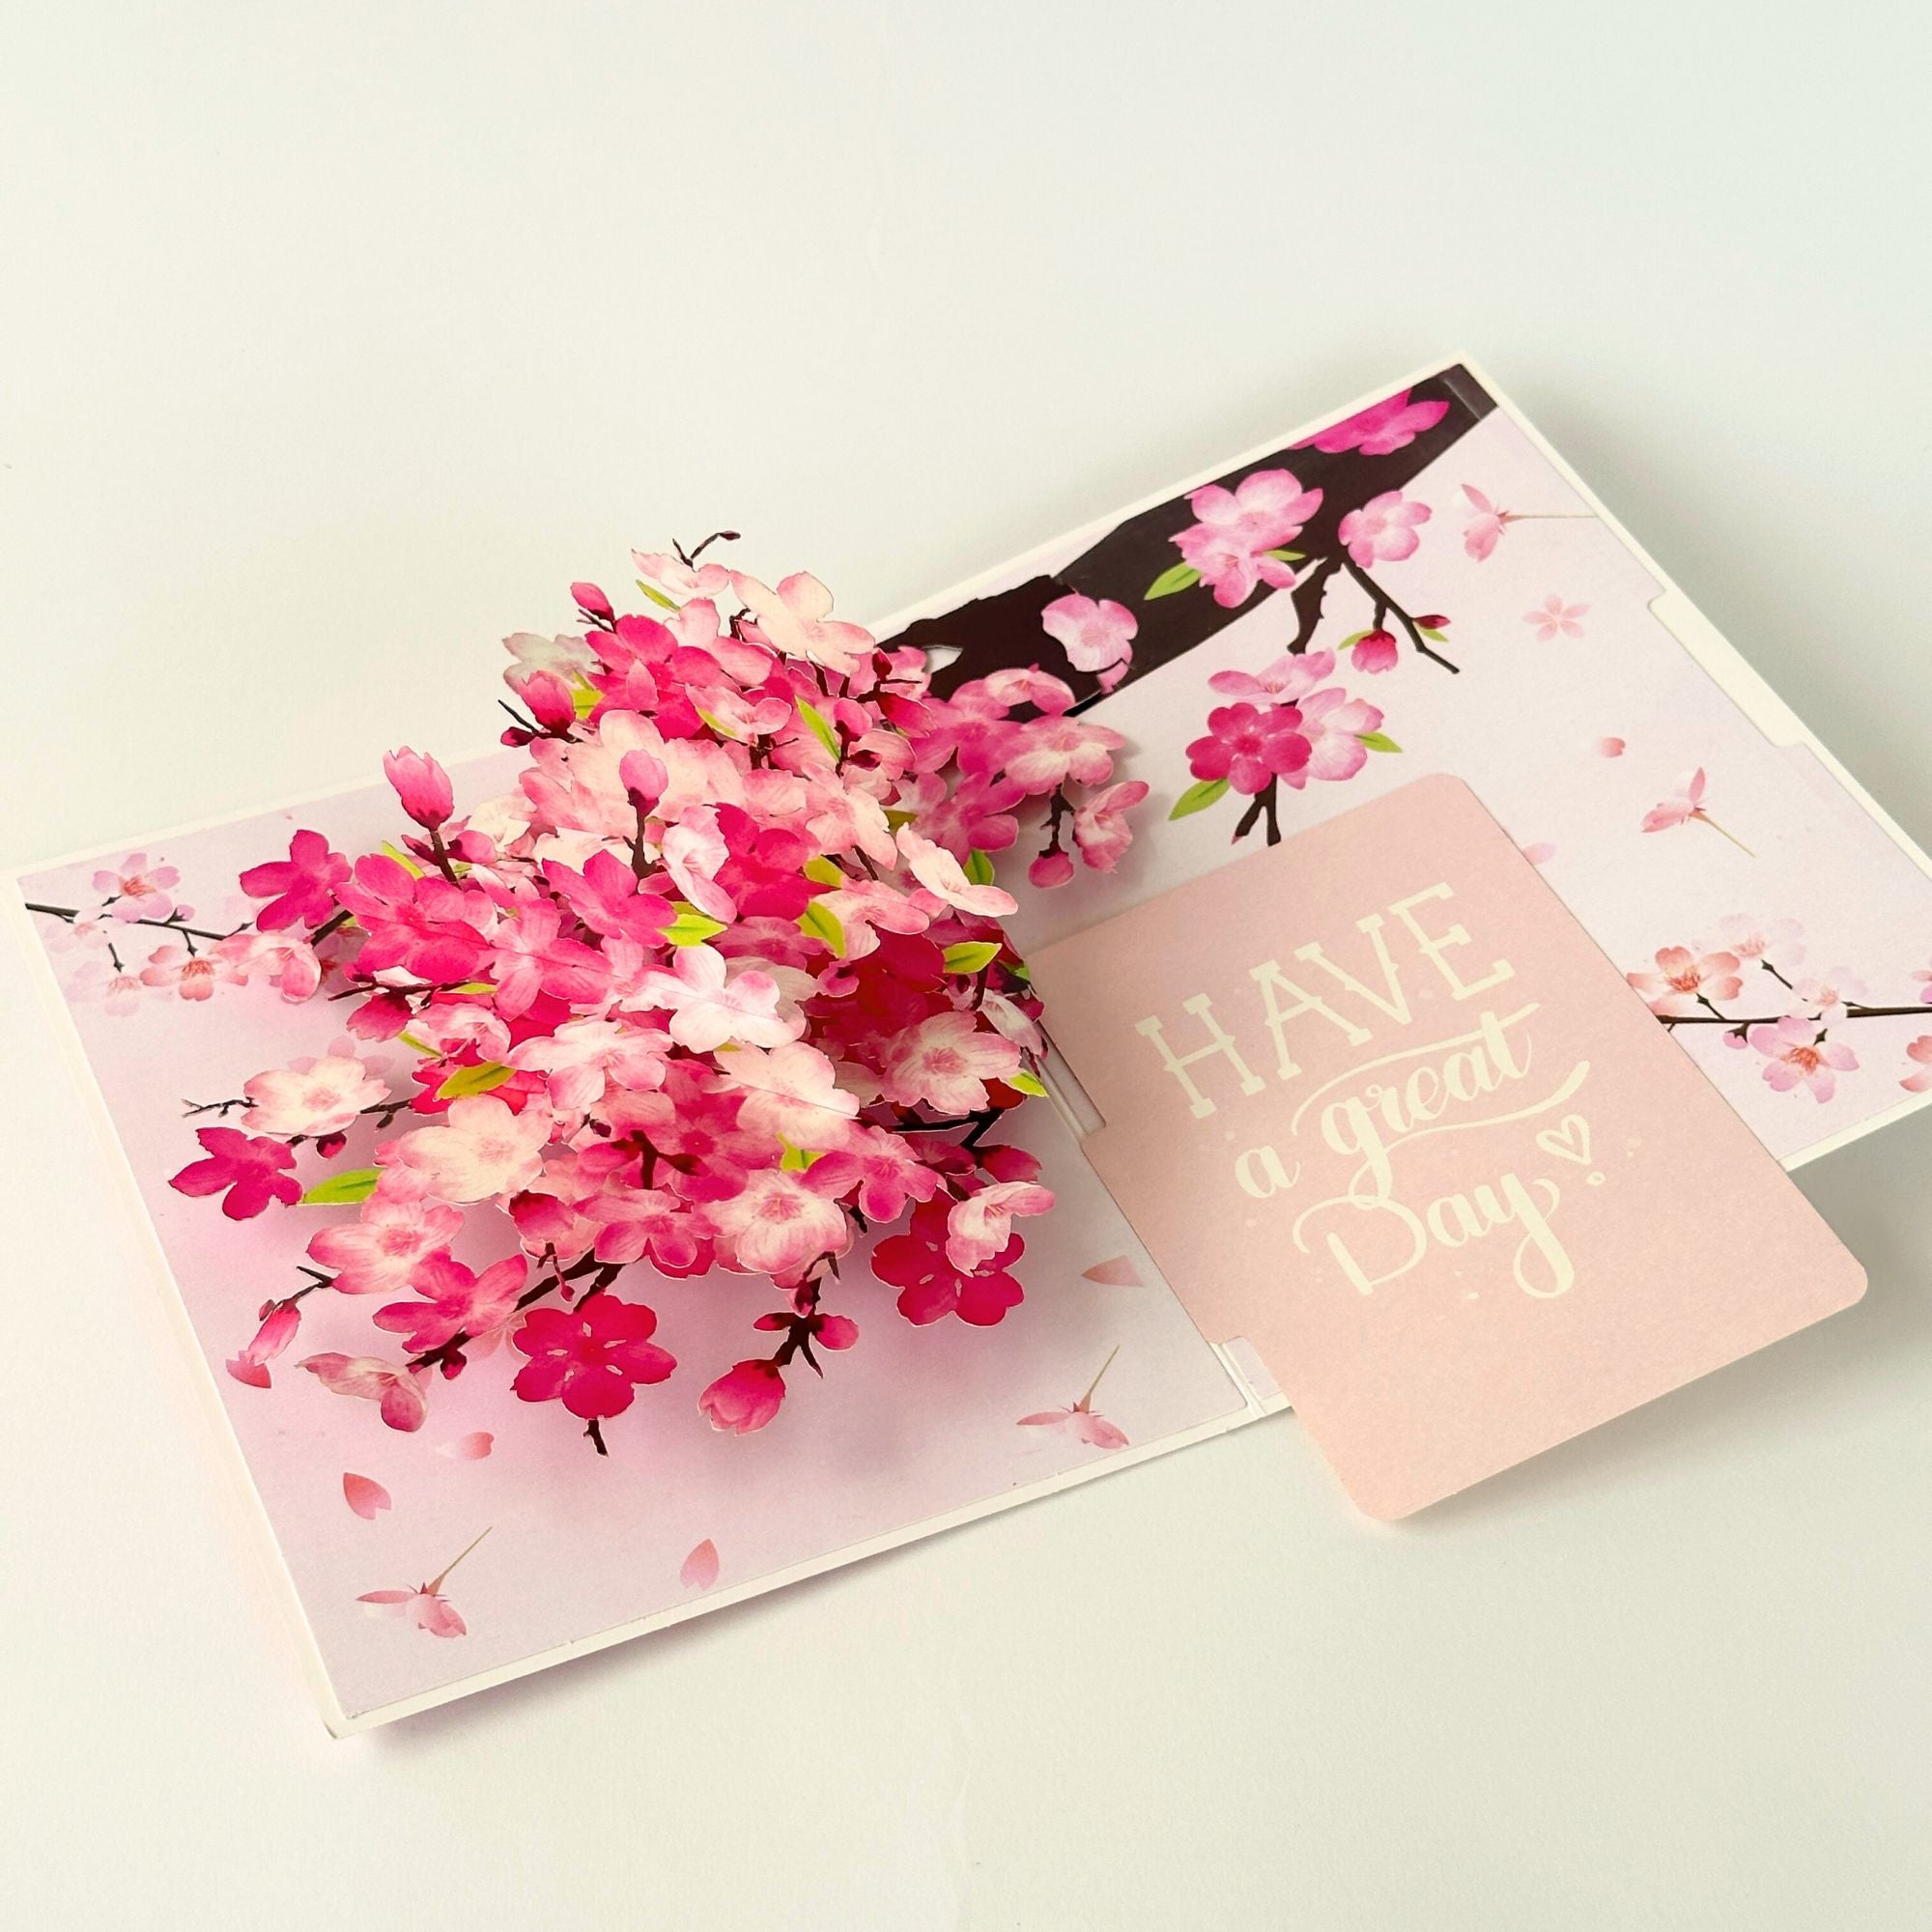 Pop Up Greeting Card Spring Cherry Blossom Blooming Colorful Nature Card Gift Idea Love Thank You Birthday Family Card Mother's Day Gift